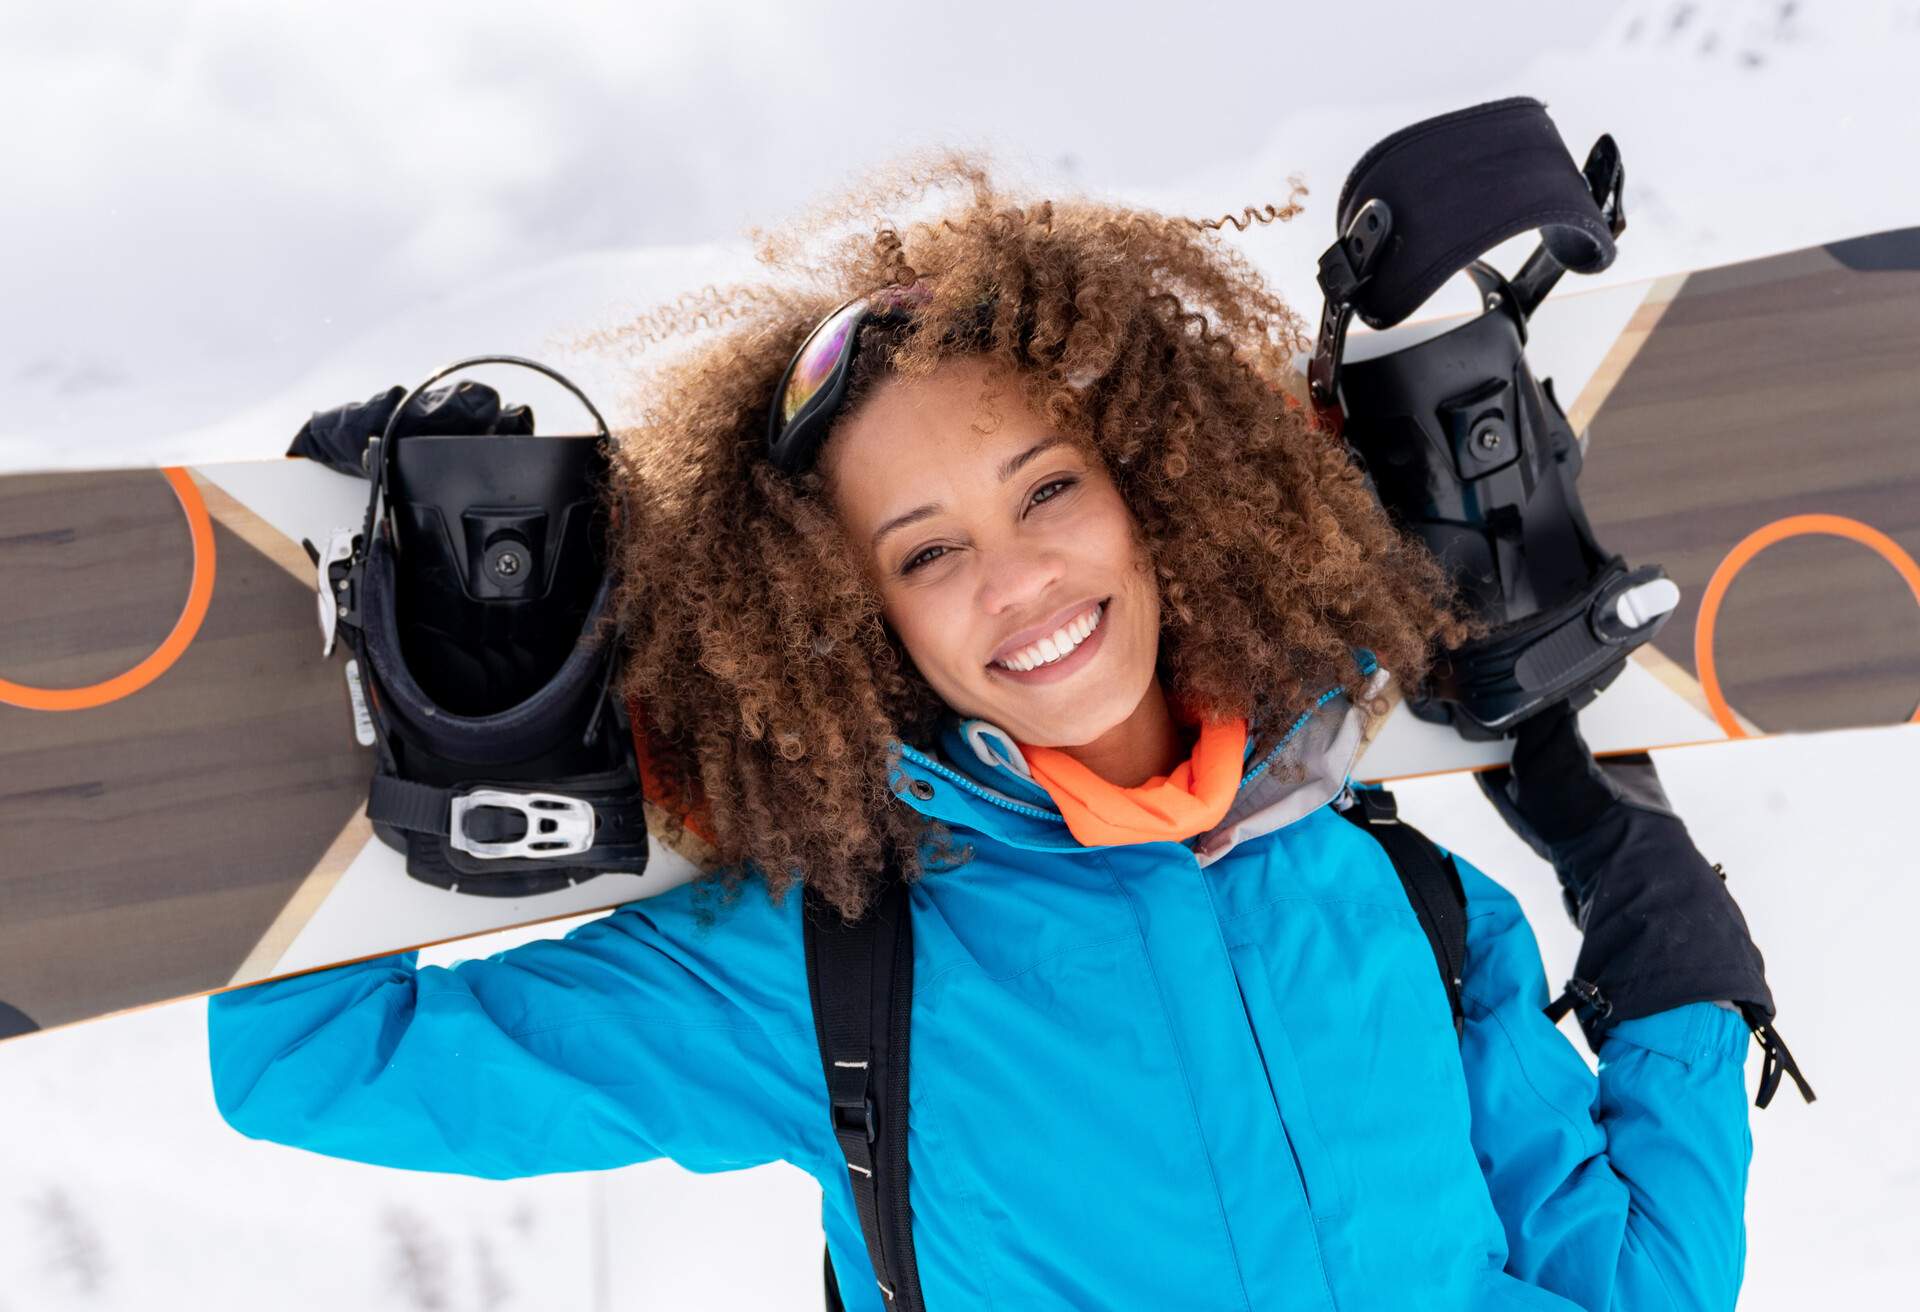 Woman wearing a blue winter shell smiling as she carries a snowboard over her shoulders.